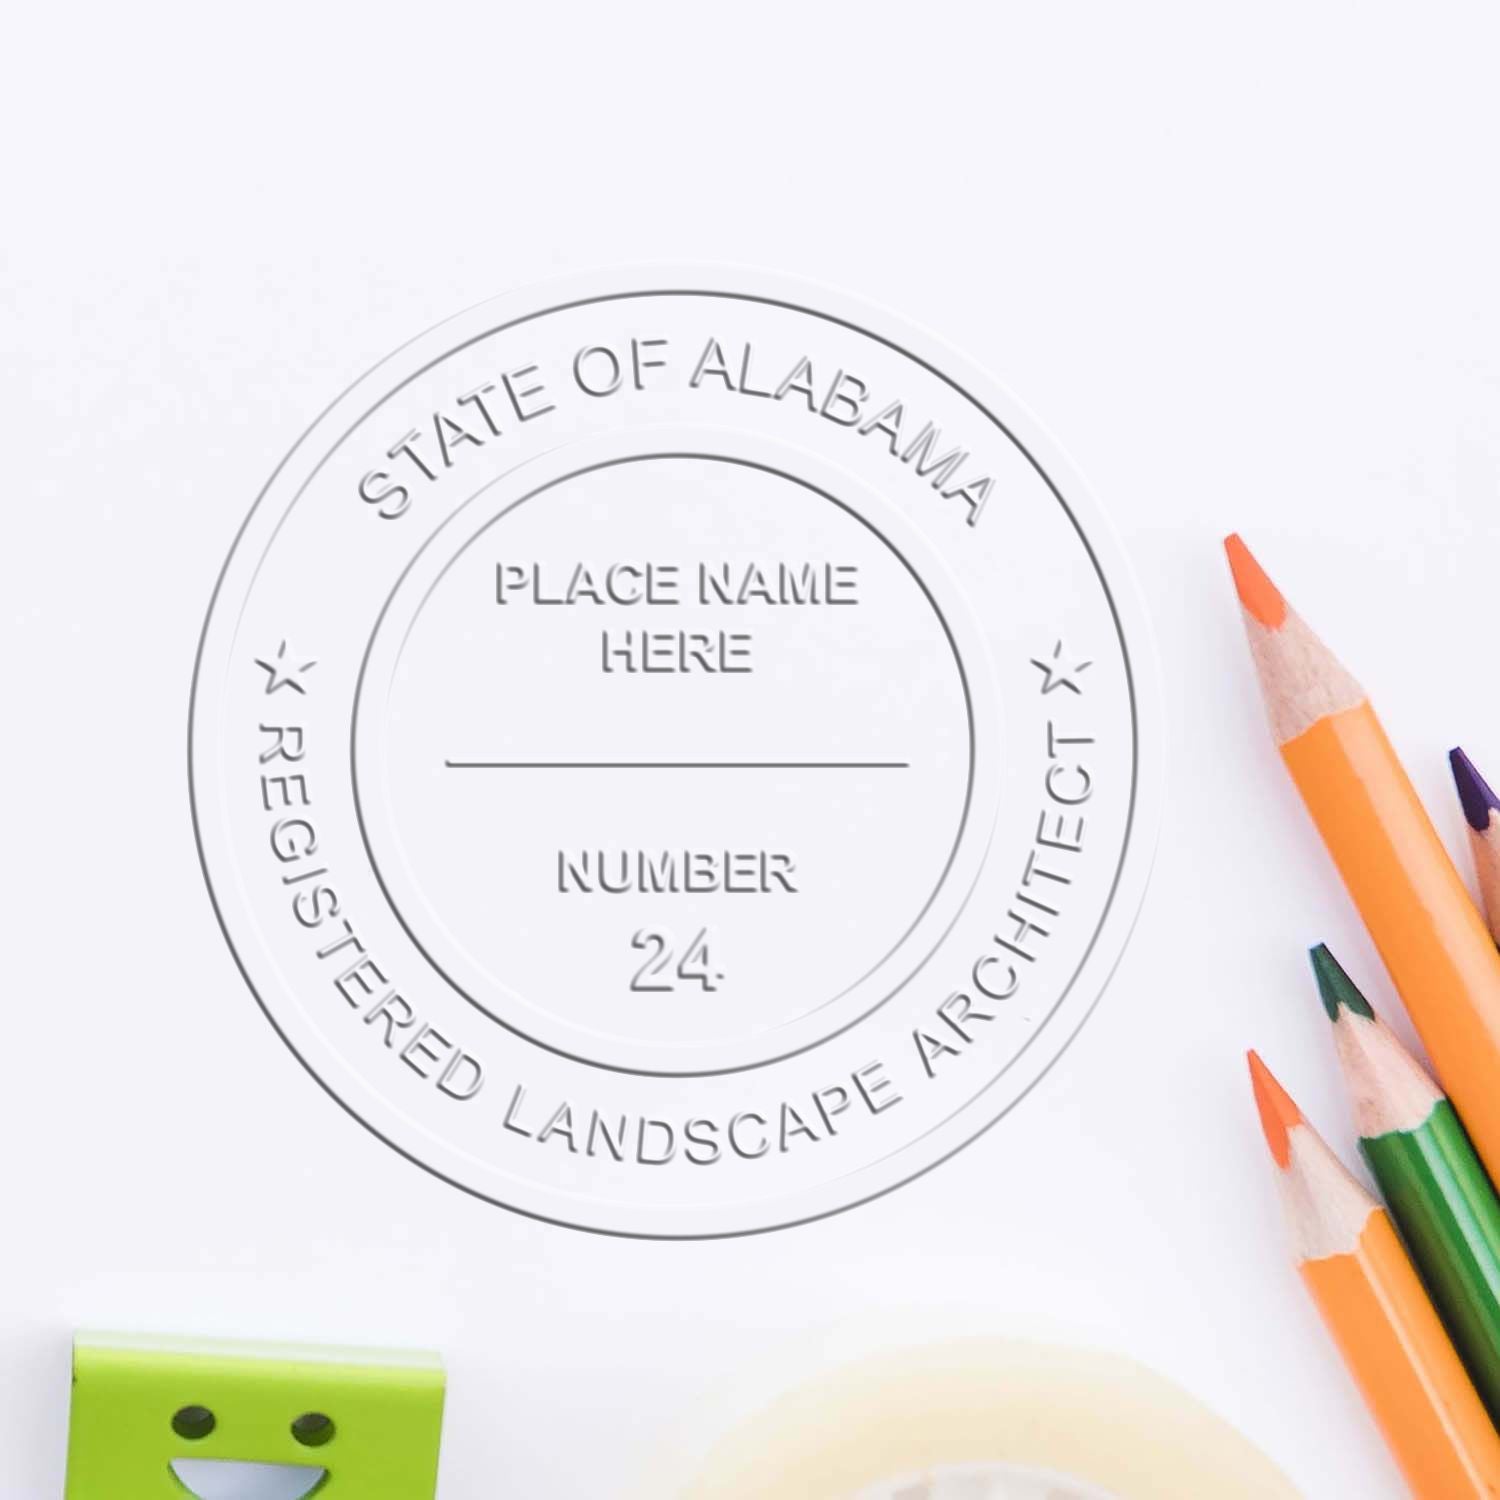 An alternative view of the Alabama Long Reach Landscape Architect Embossing Stamp stamped on a sheet of paper showing the image in use